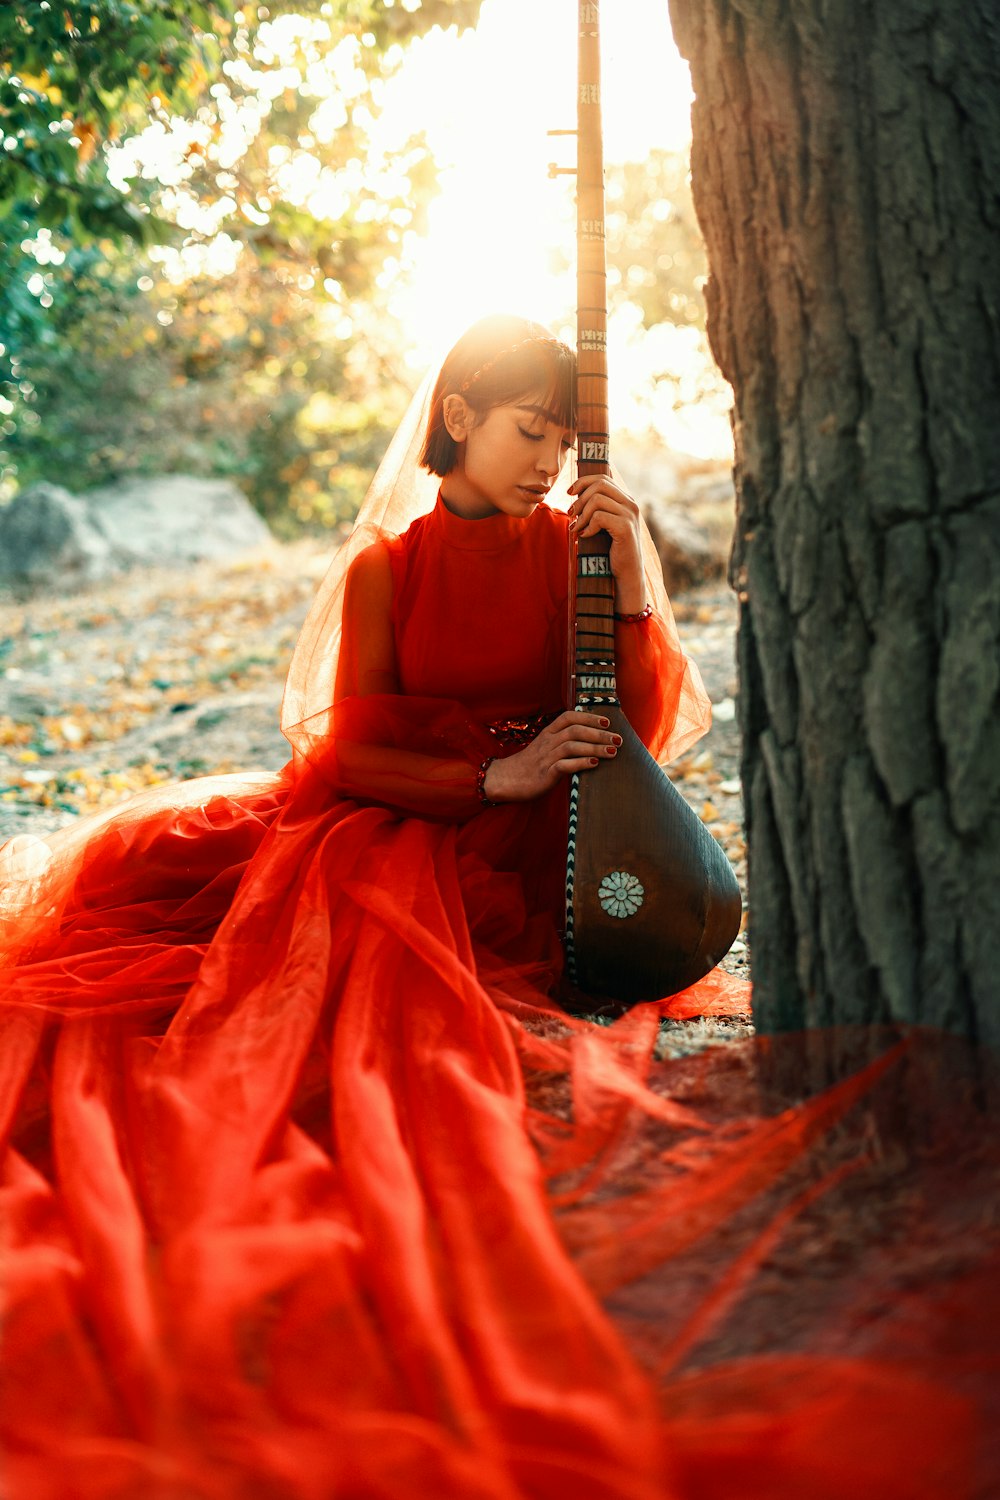 a woman in a red dress is holding a guitar